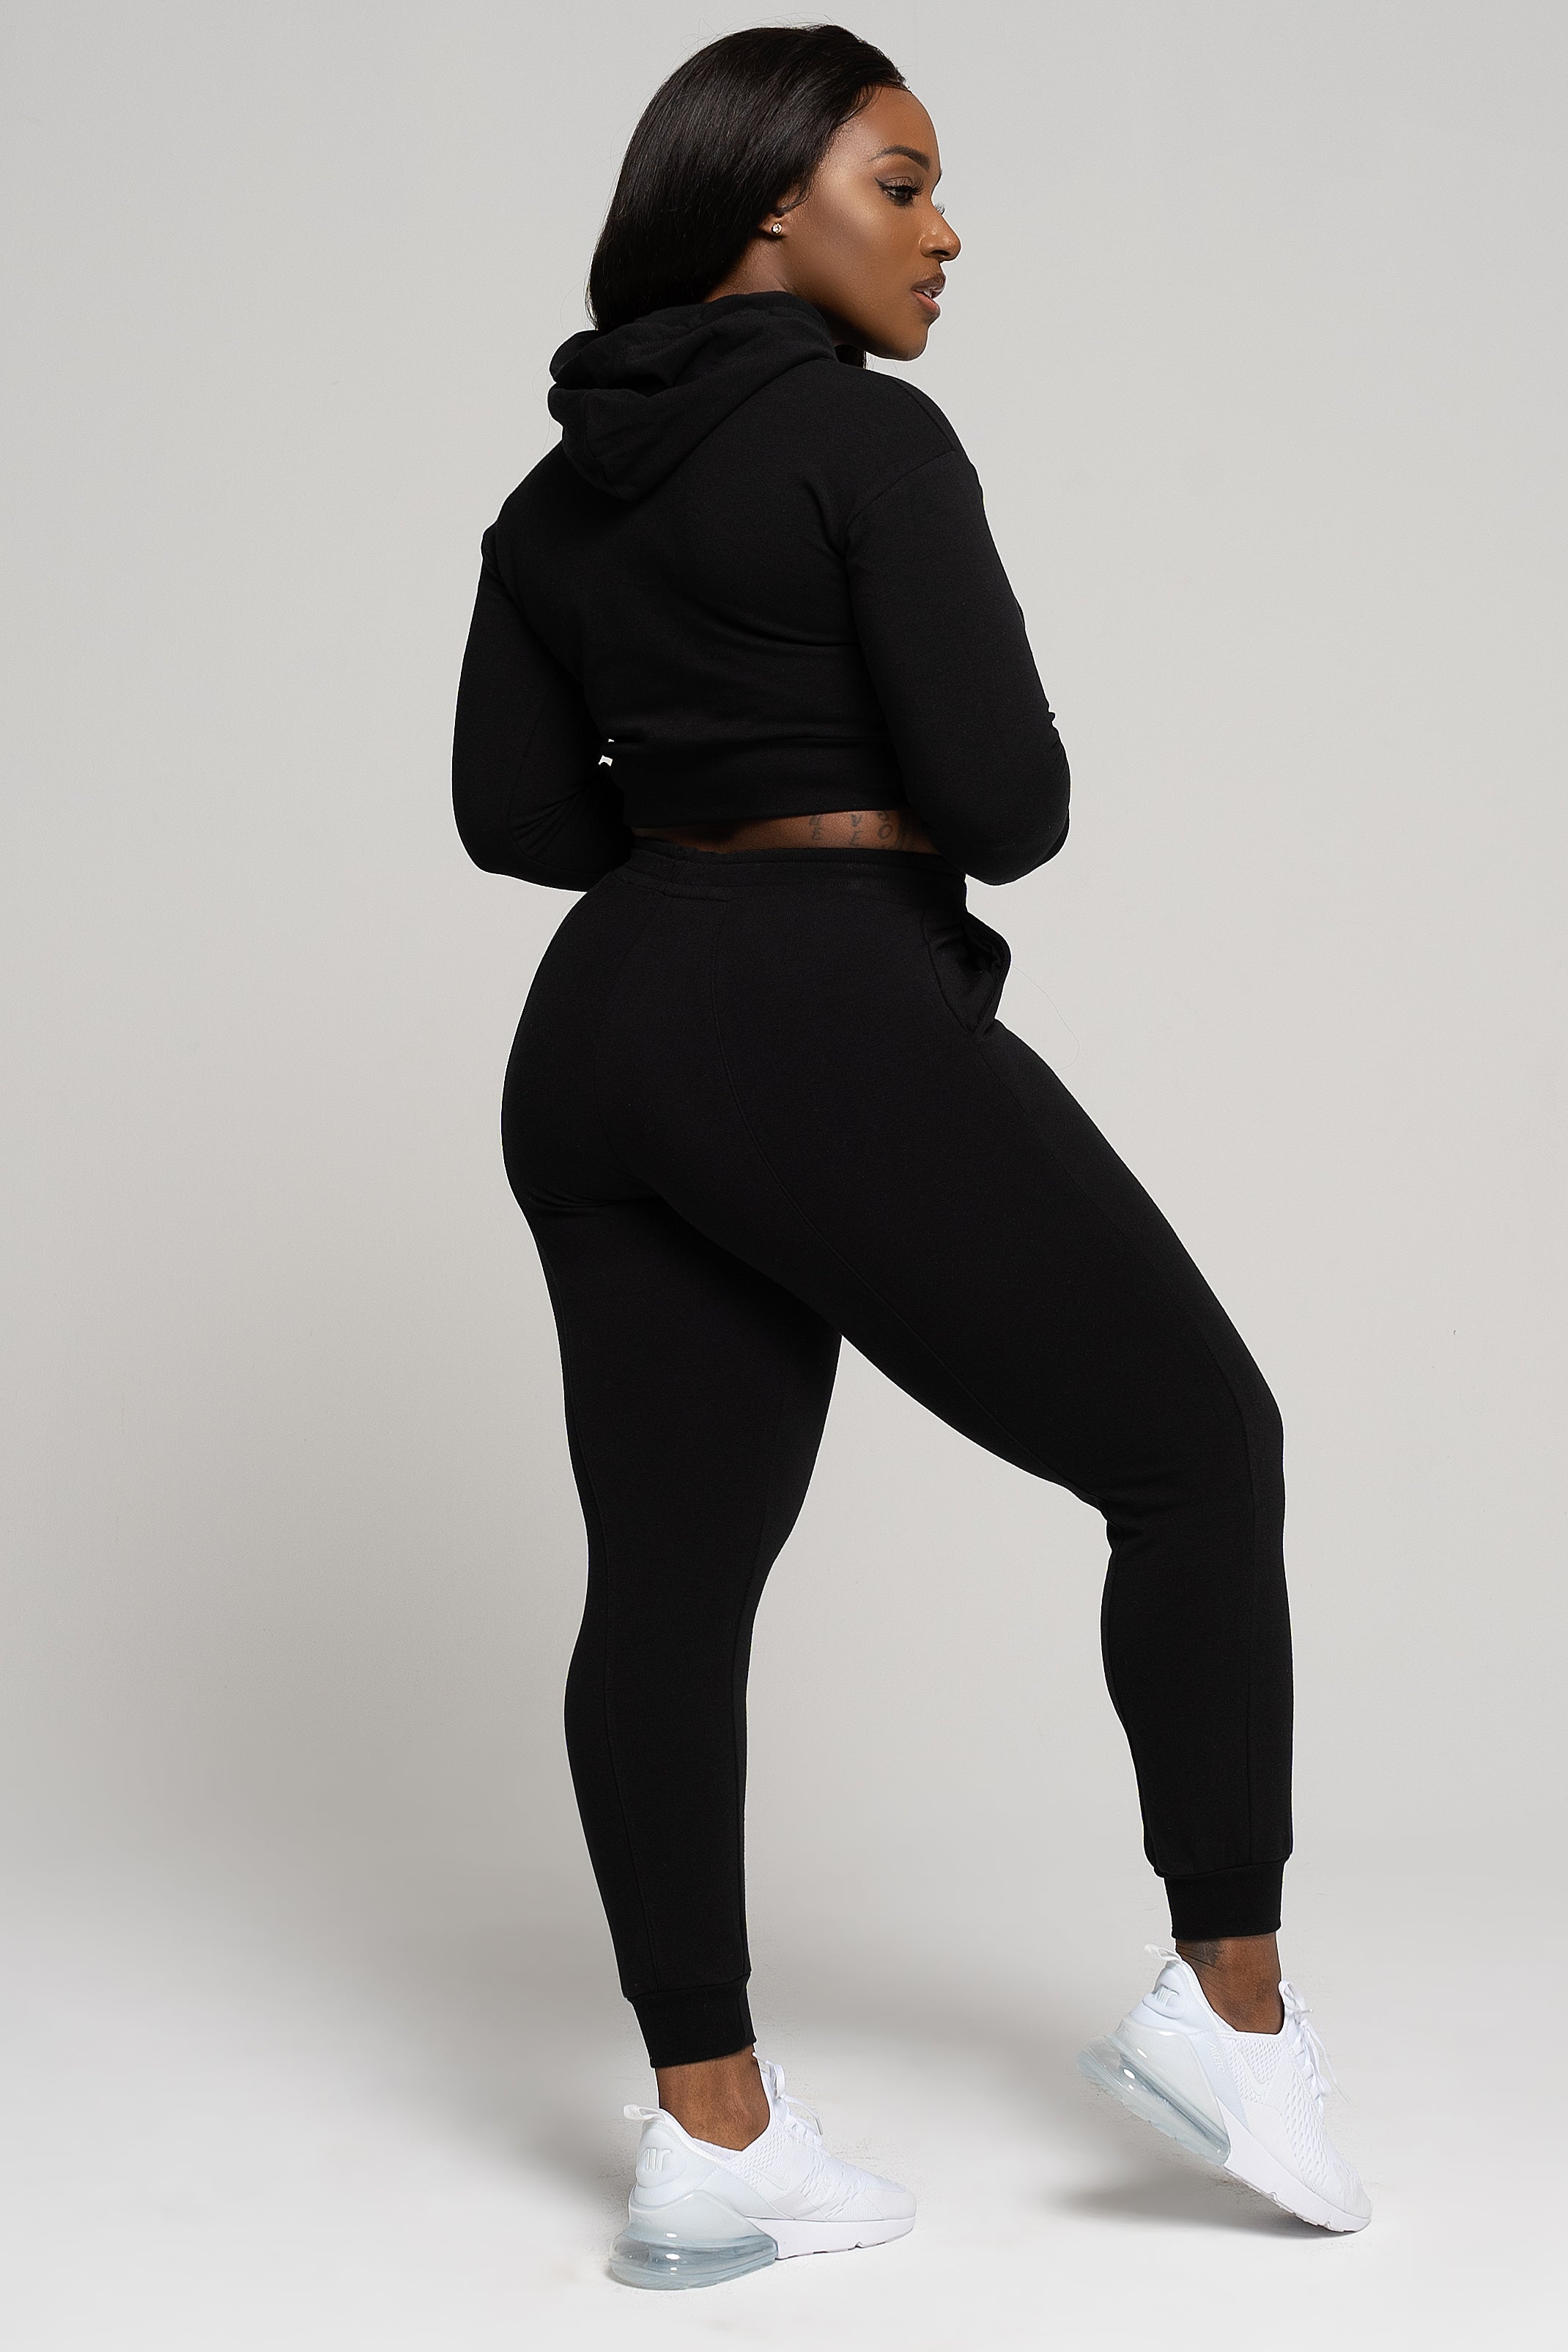 LiCi Fit Black Fitted Crop Hoodie & Black Fitted Sweat Pants